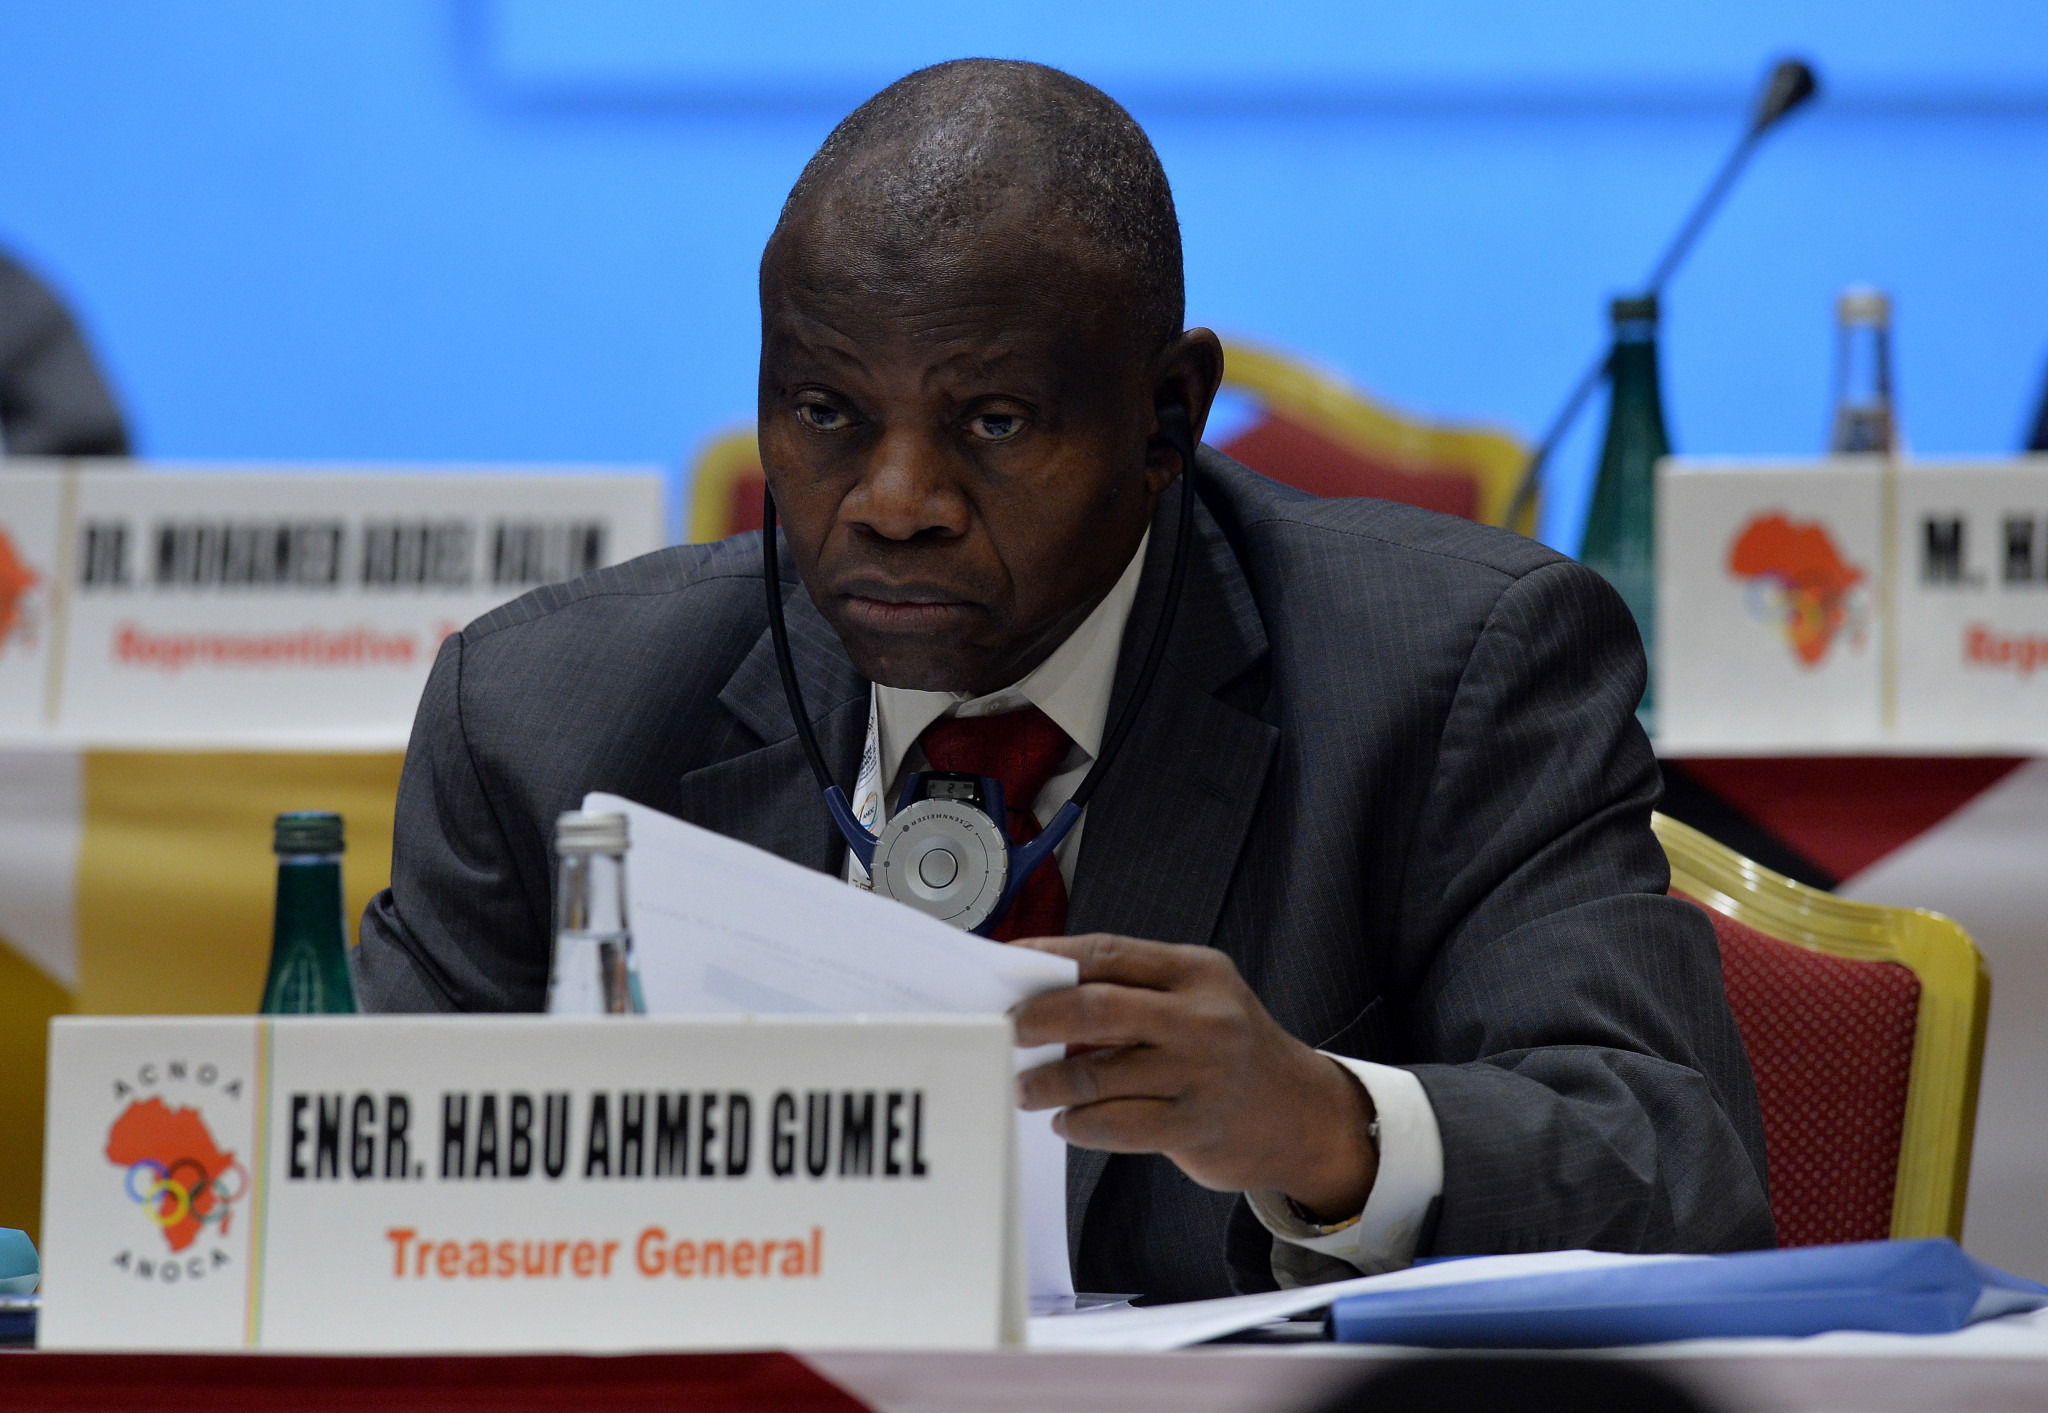 ANOC treasurer Habu Gumel is also named in the letter ©Getty Images